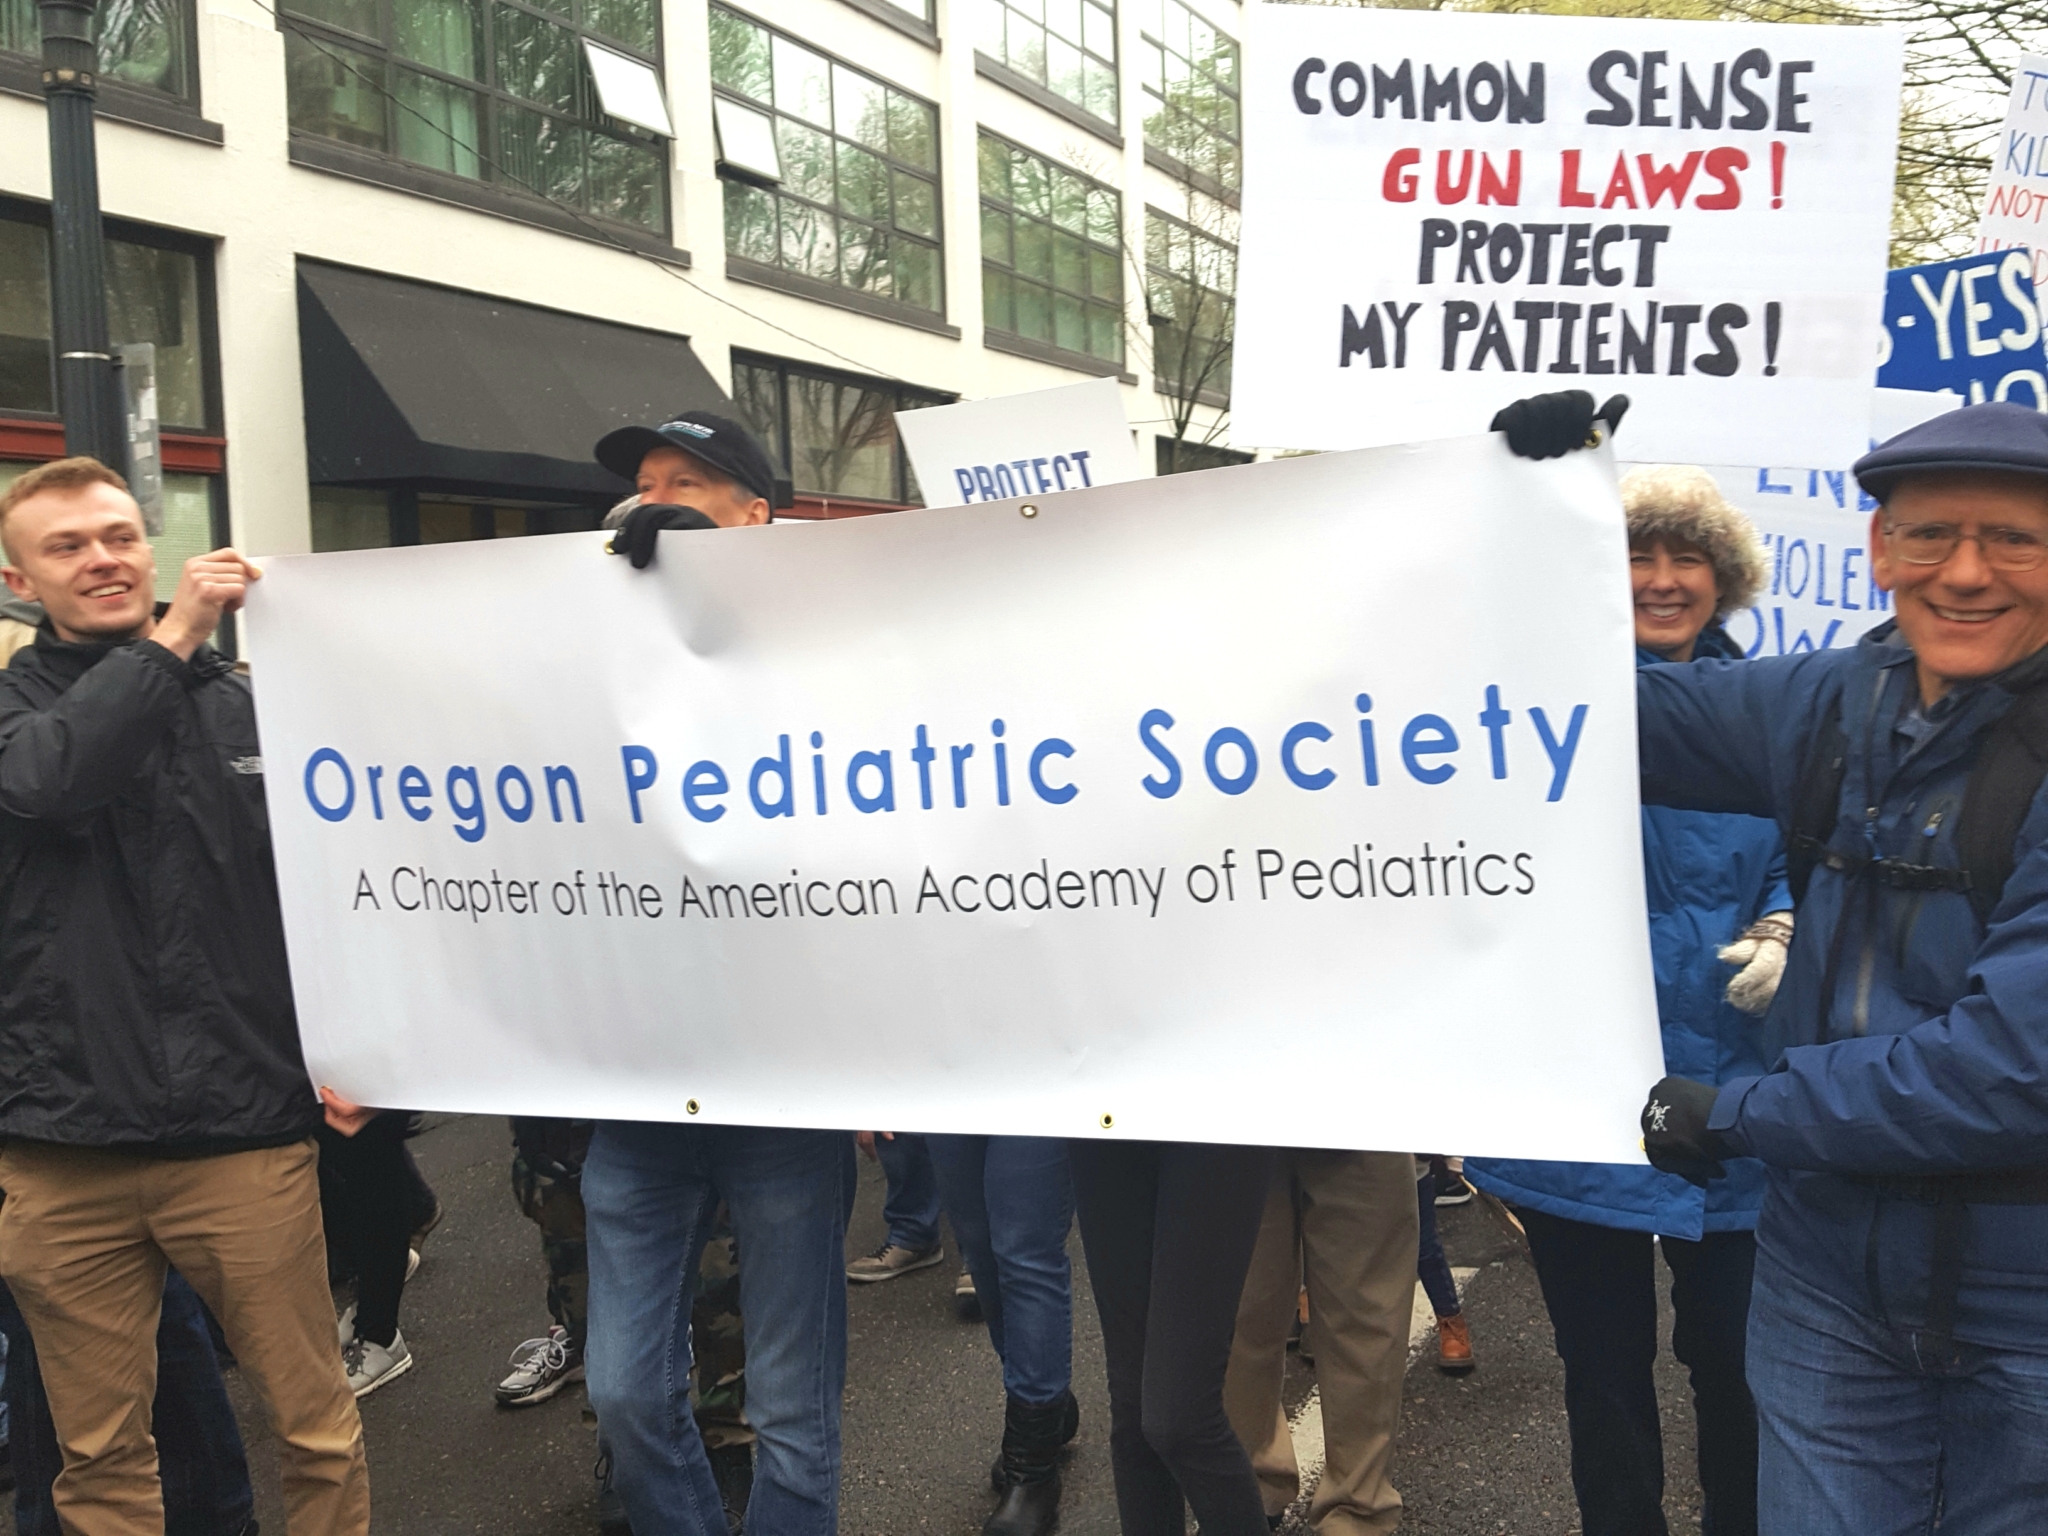 A group of people march holding a banner that says "Oregon Pediatric Society. A chapter of the American Academy of Pediatrics." Behind these people are additional marchers holding signs about "common sense gun laws! Protect my patients!"